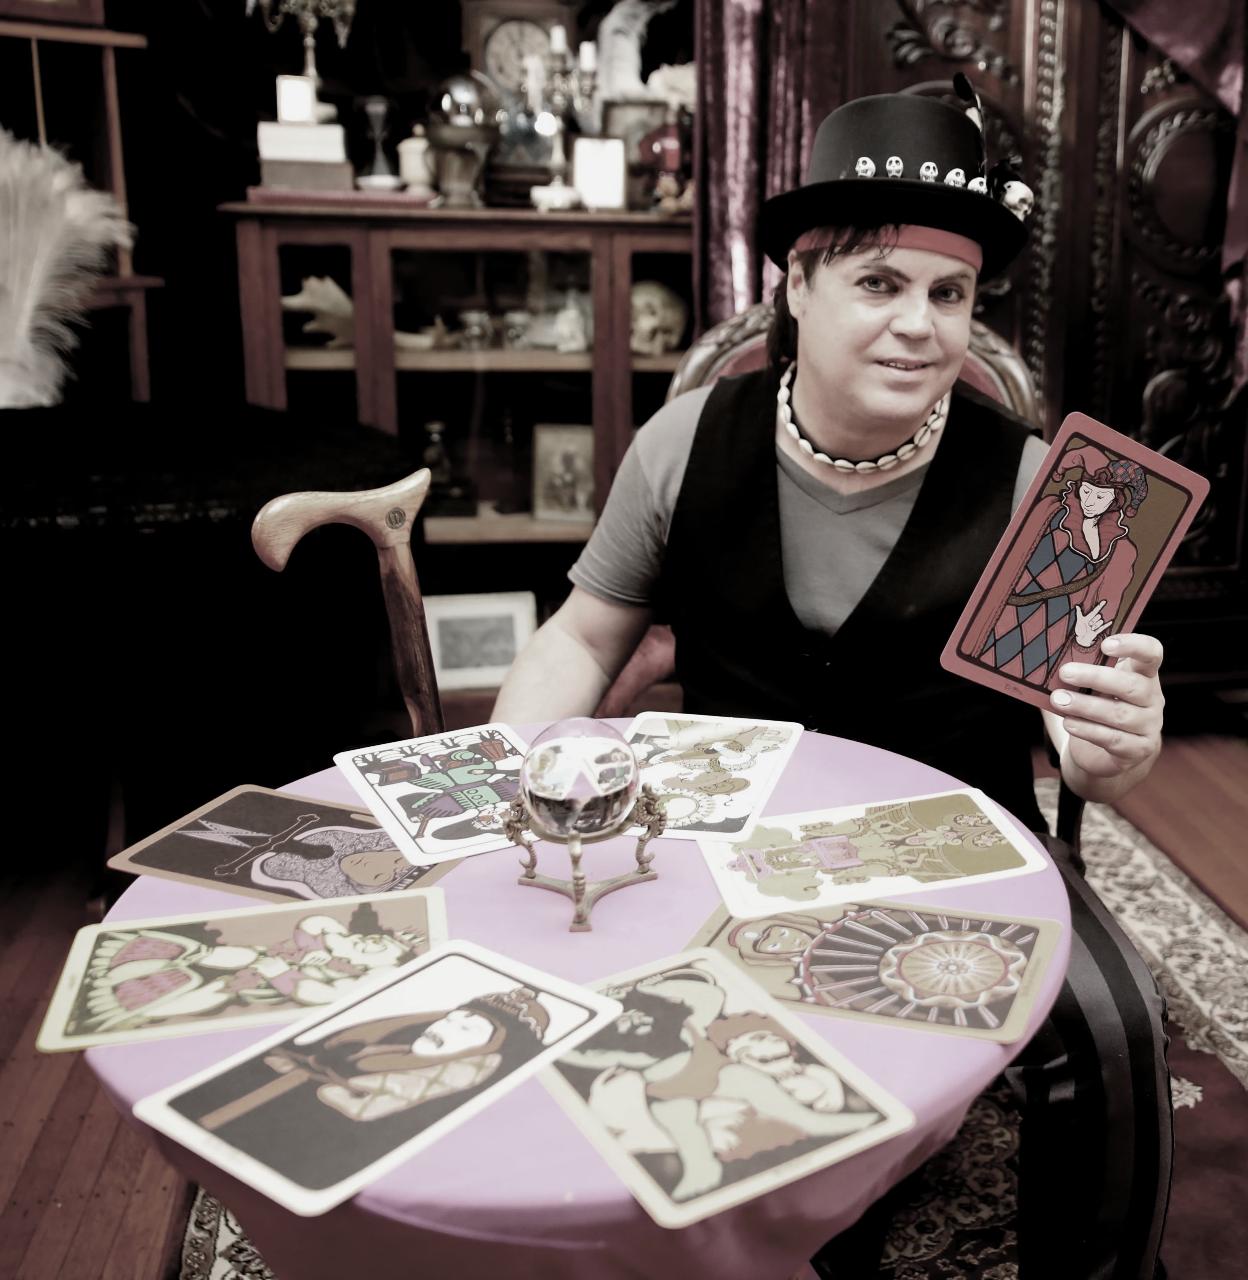 Pirate's Alley Cafe' Presents: Dok Lazlo's Modern Alchemy Tarot Party + Free Haunted French Quarter Walking Tour !